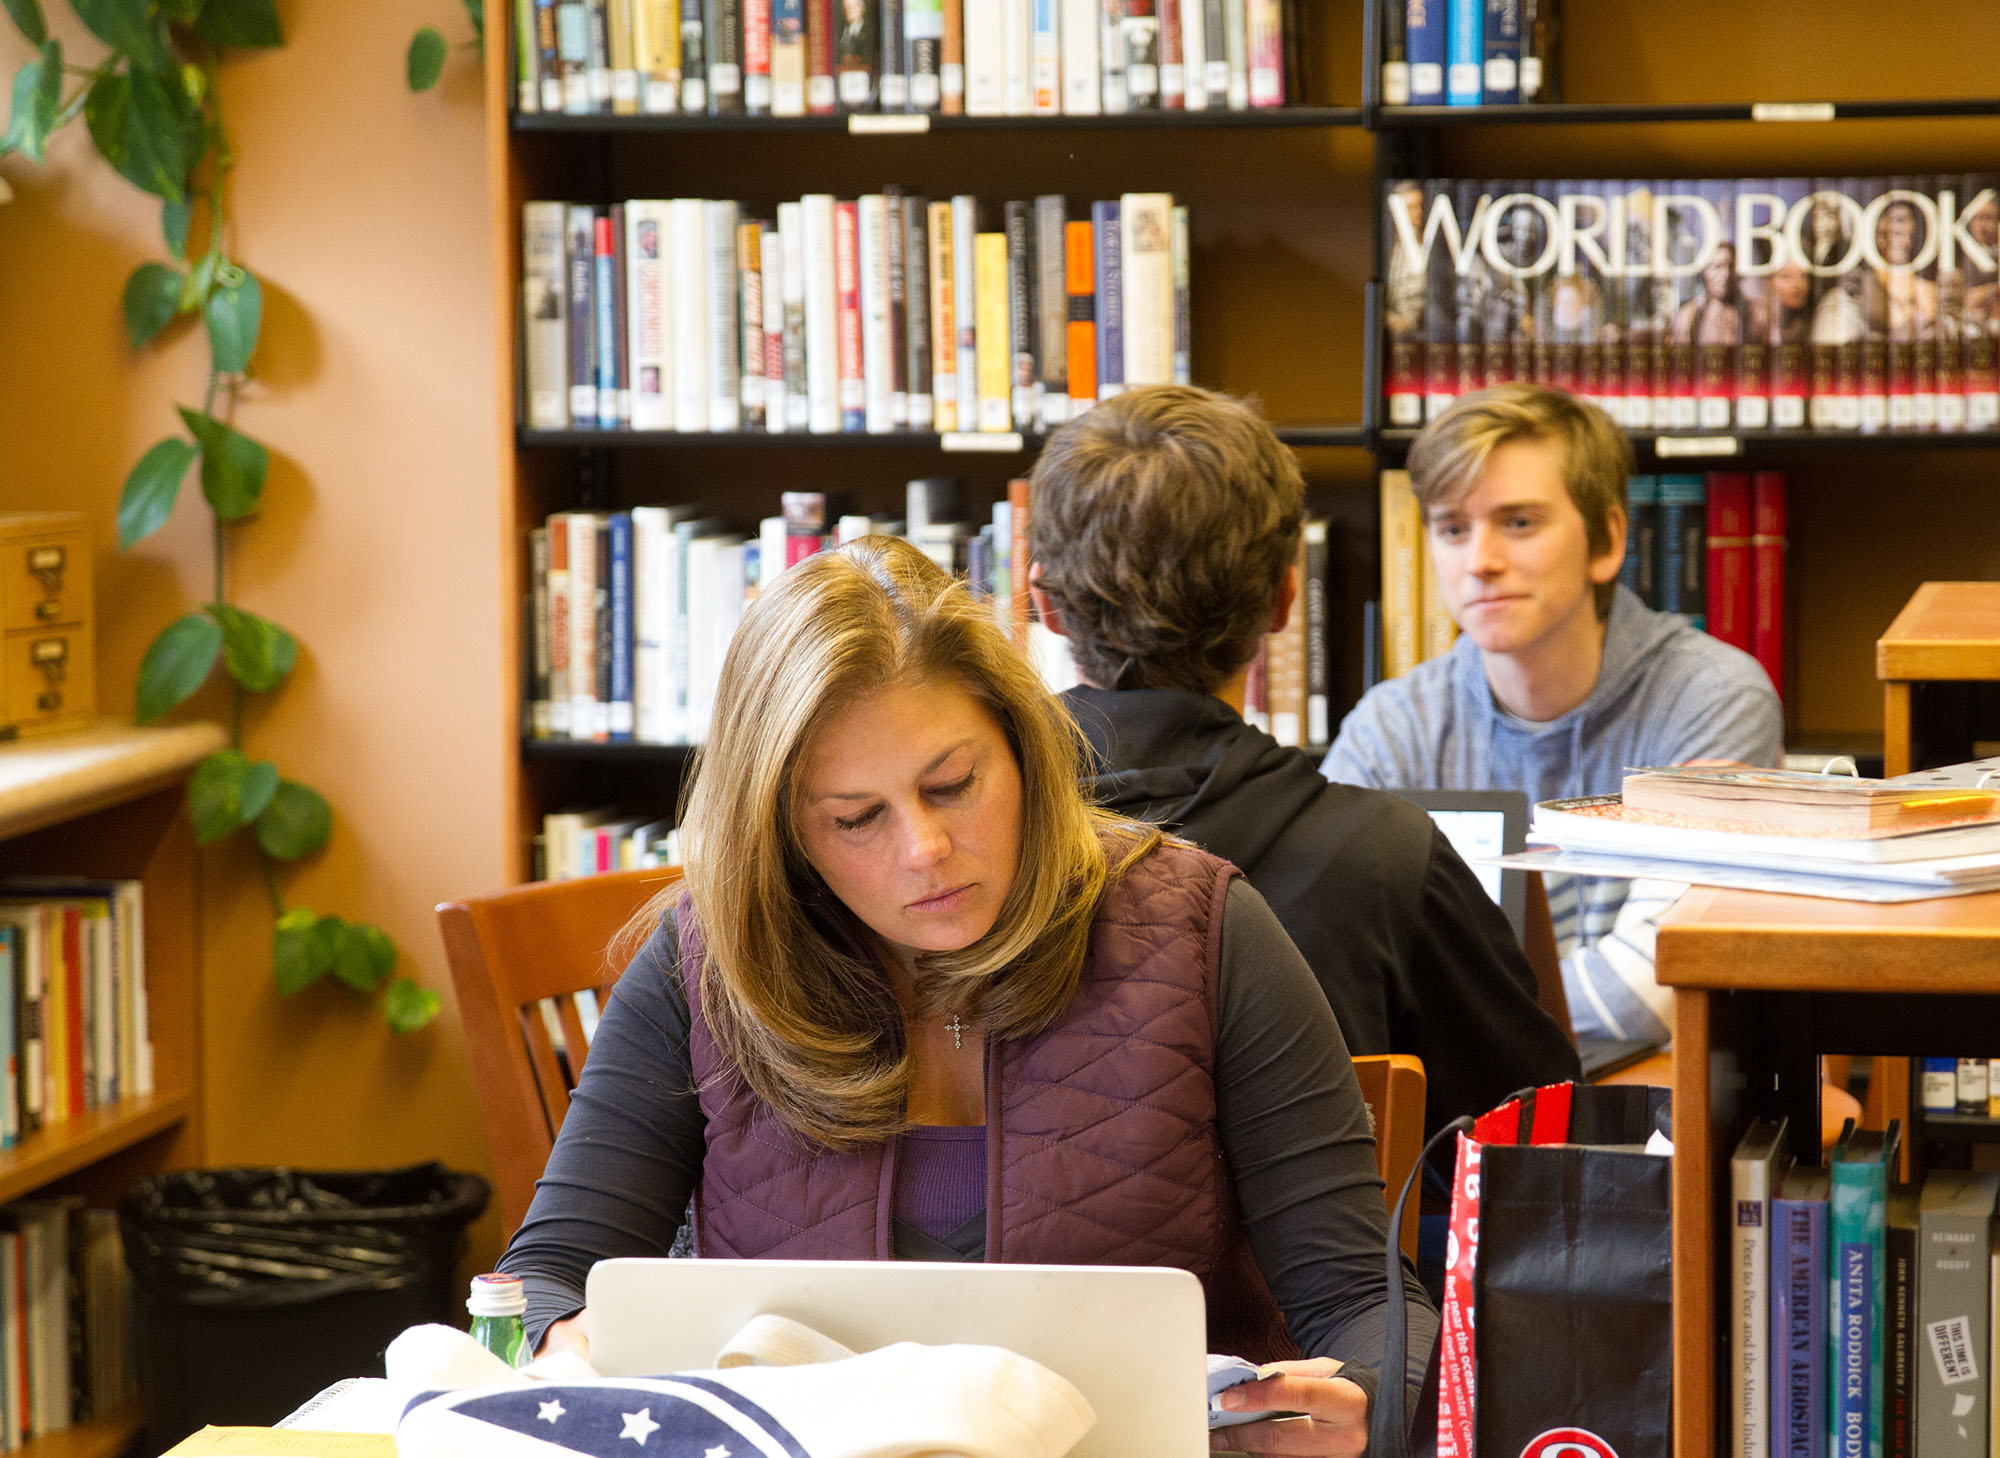 Student studying at the library in front of the World Book Encyclopedia collection